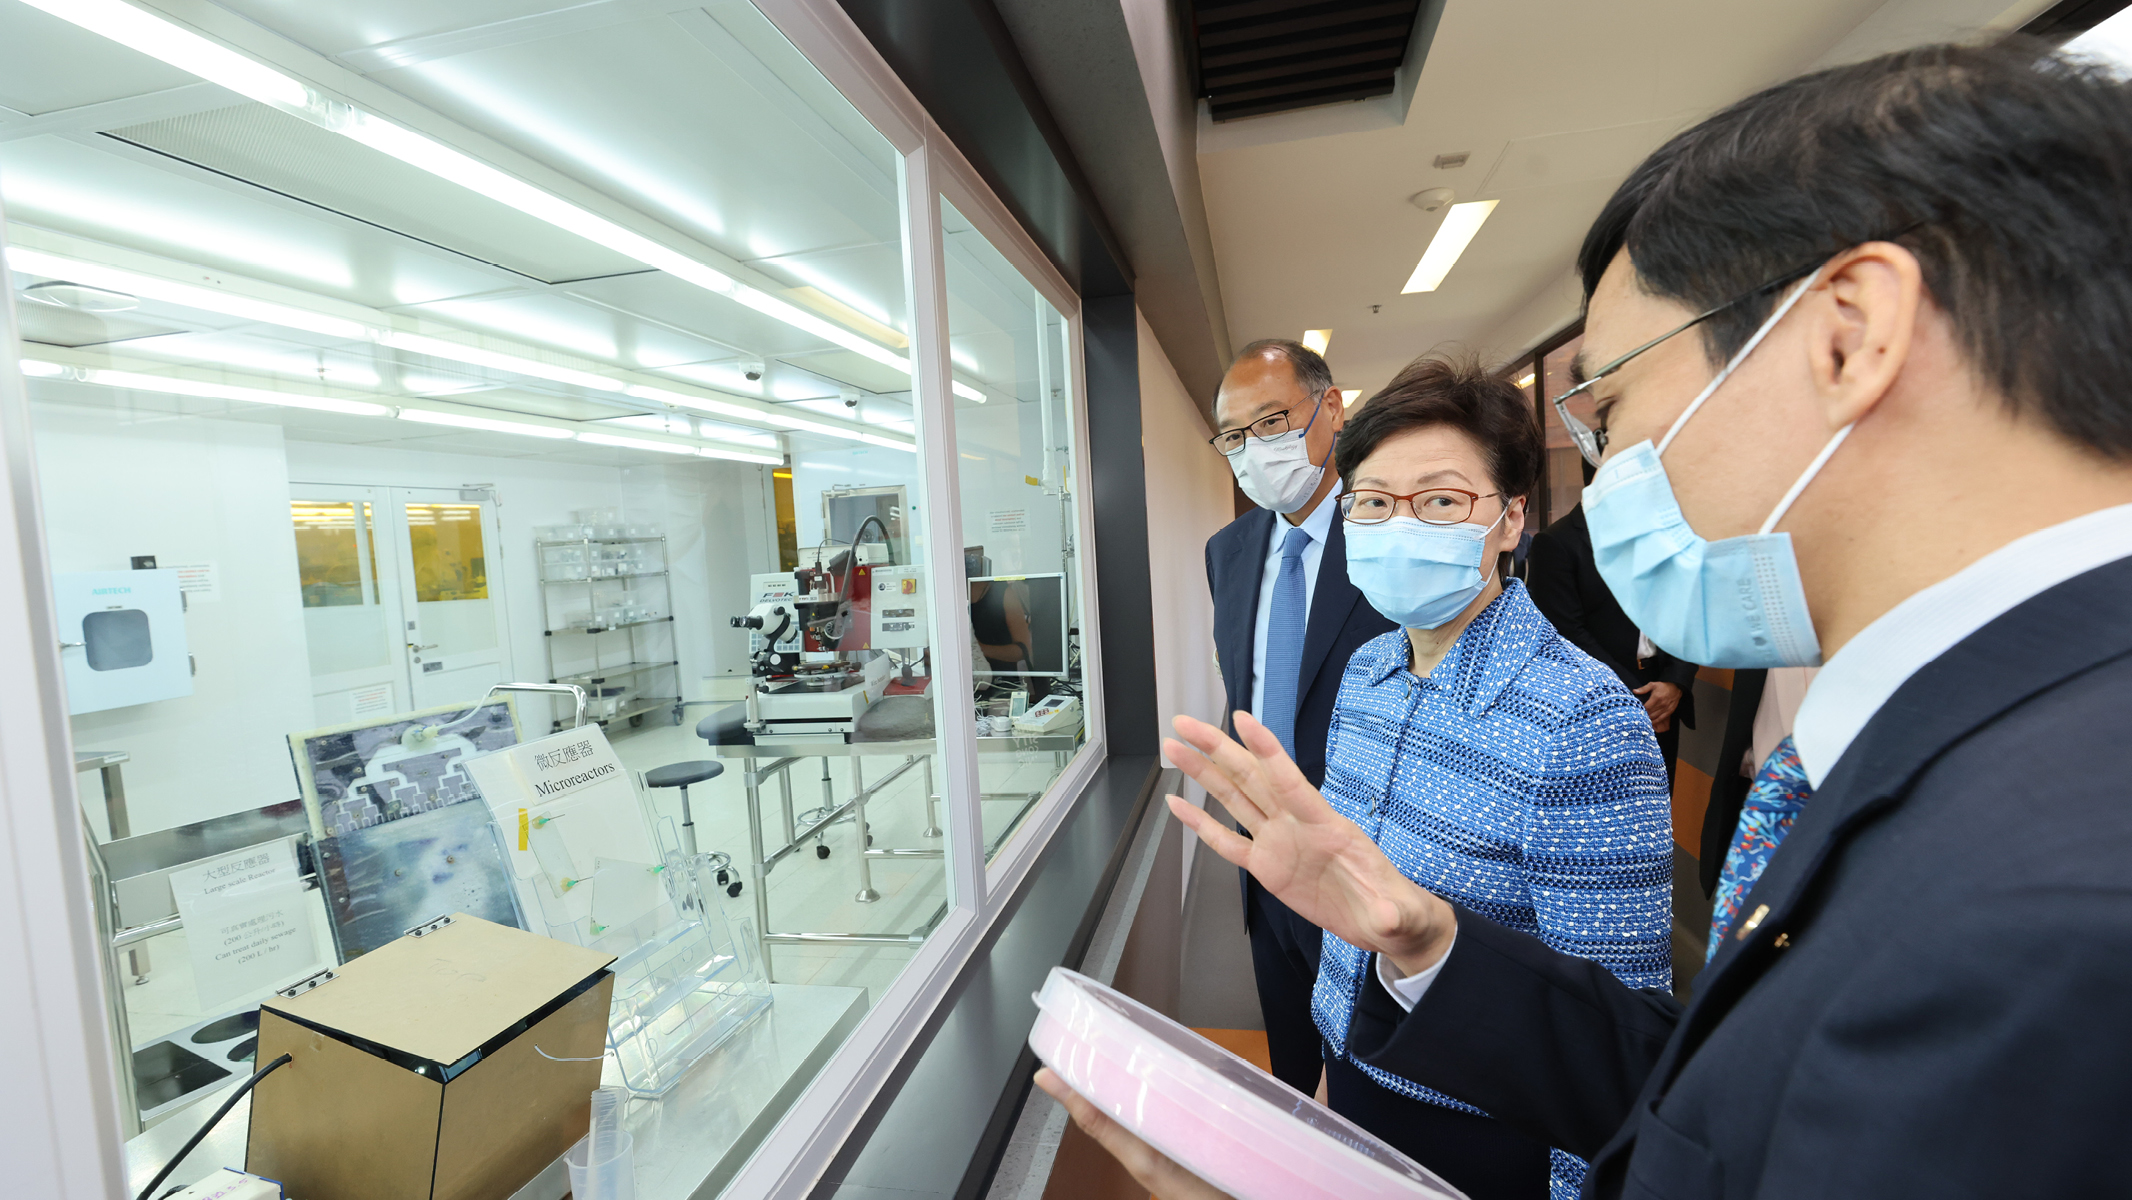 Professor Daniel Lau (first from right), Director of UMF and Head of Department of Applied Physics, showed Mrs Lam the projects conducted in the UMF’s Cleanroom.